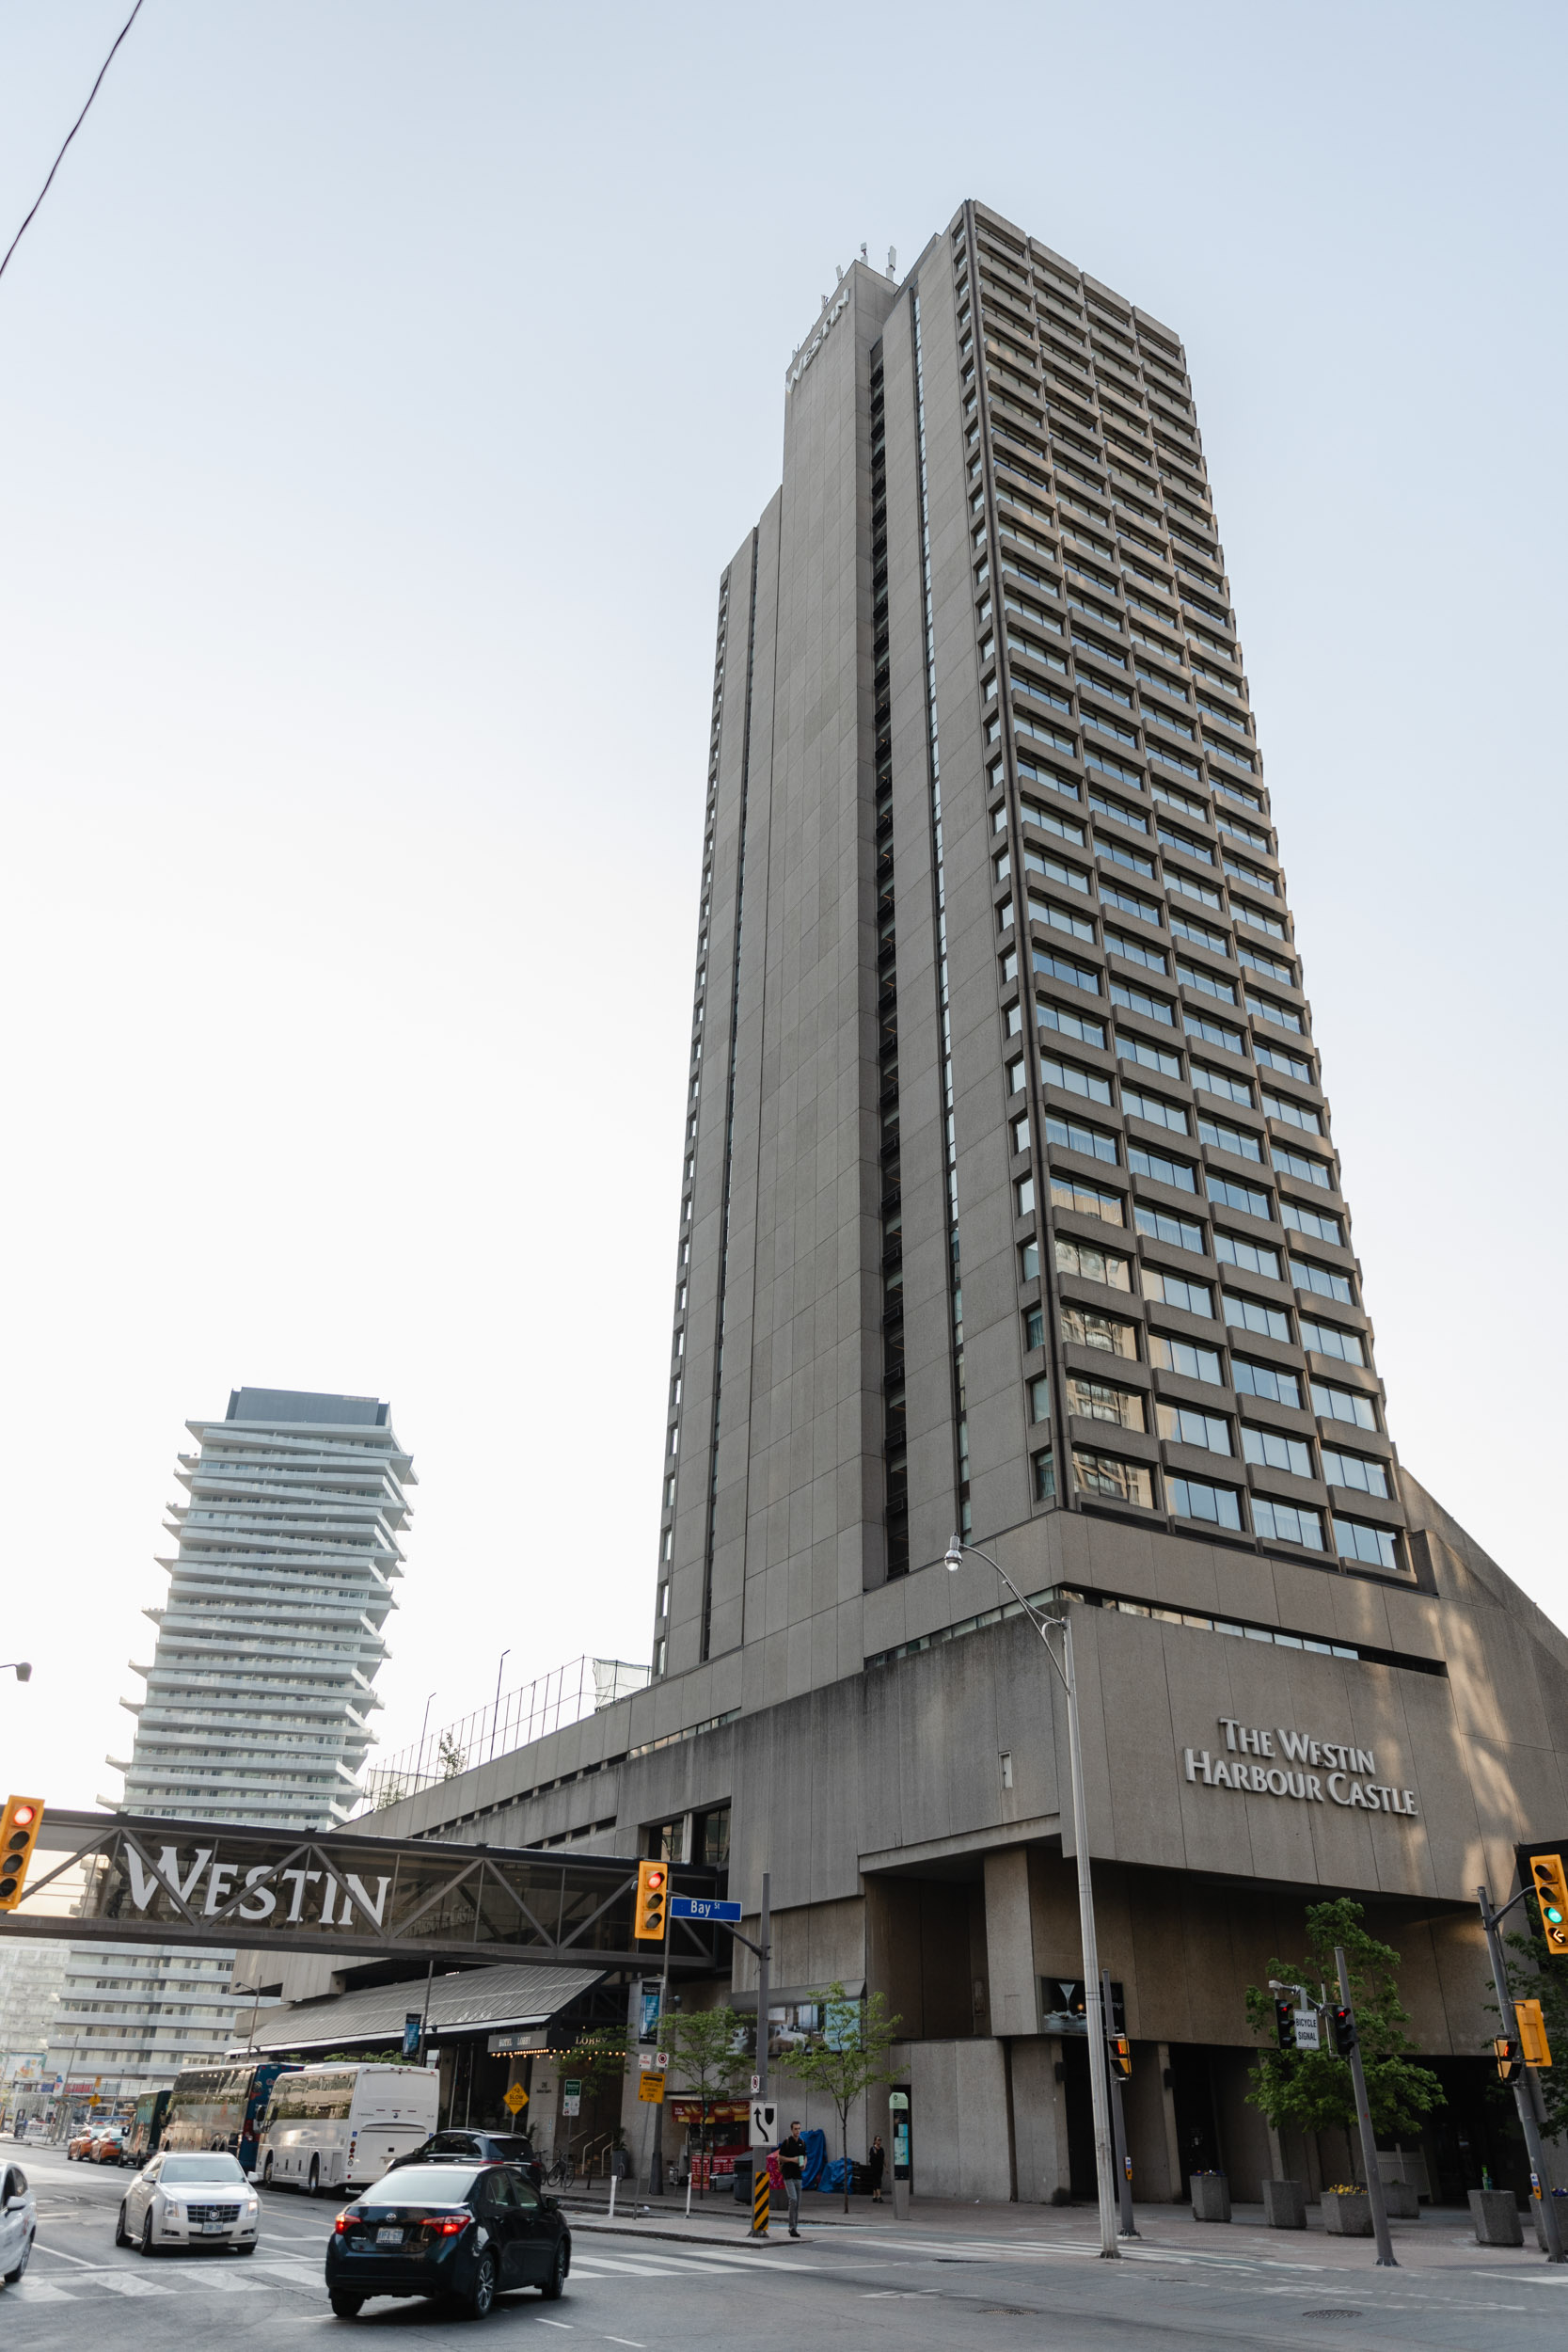 A conference venue showcasing a prominent Westin Toronto building, expertly captured in photography.